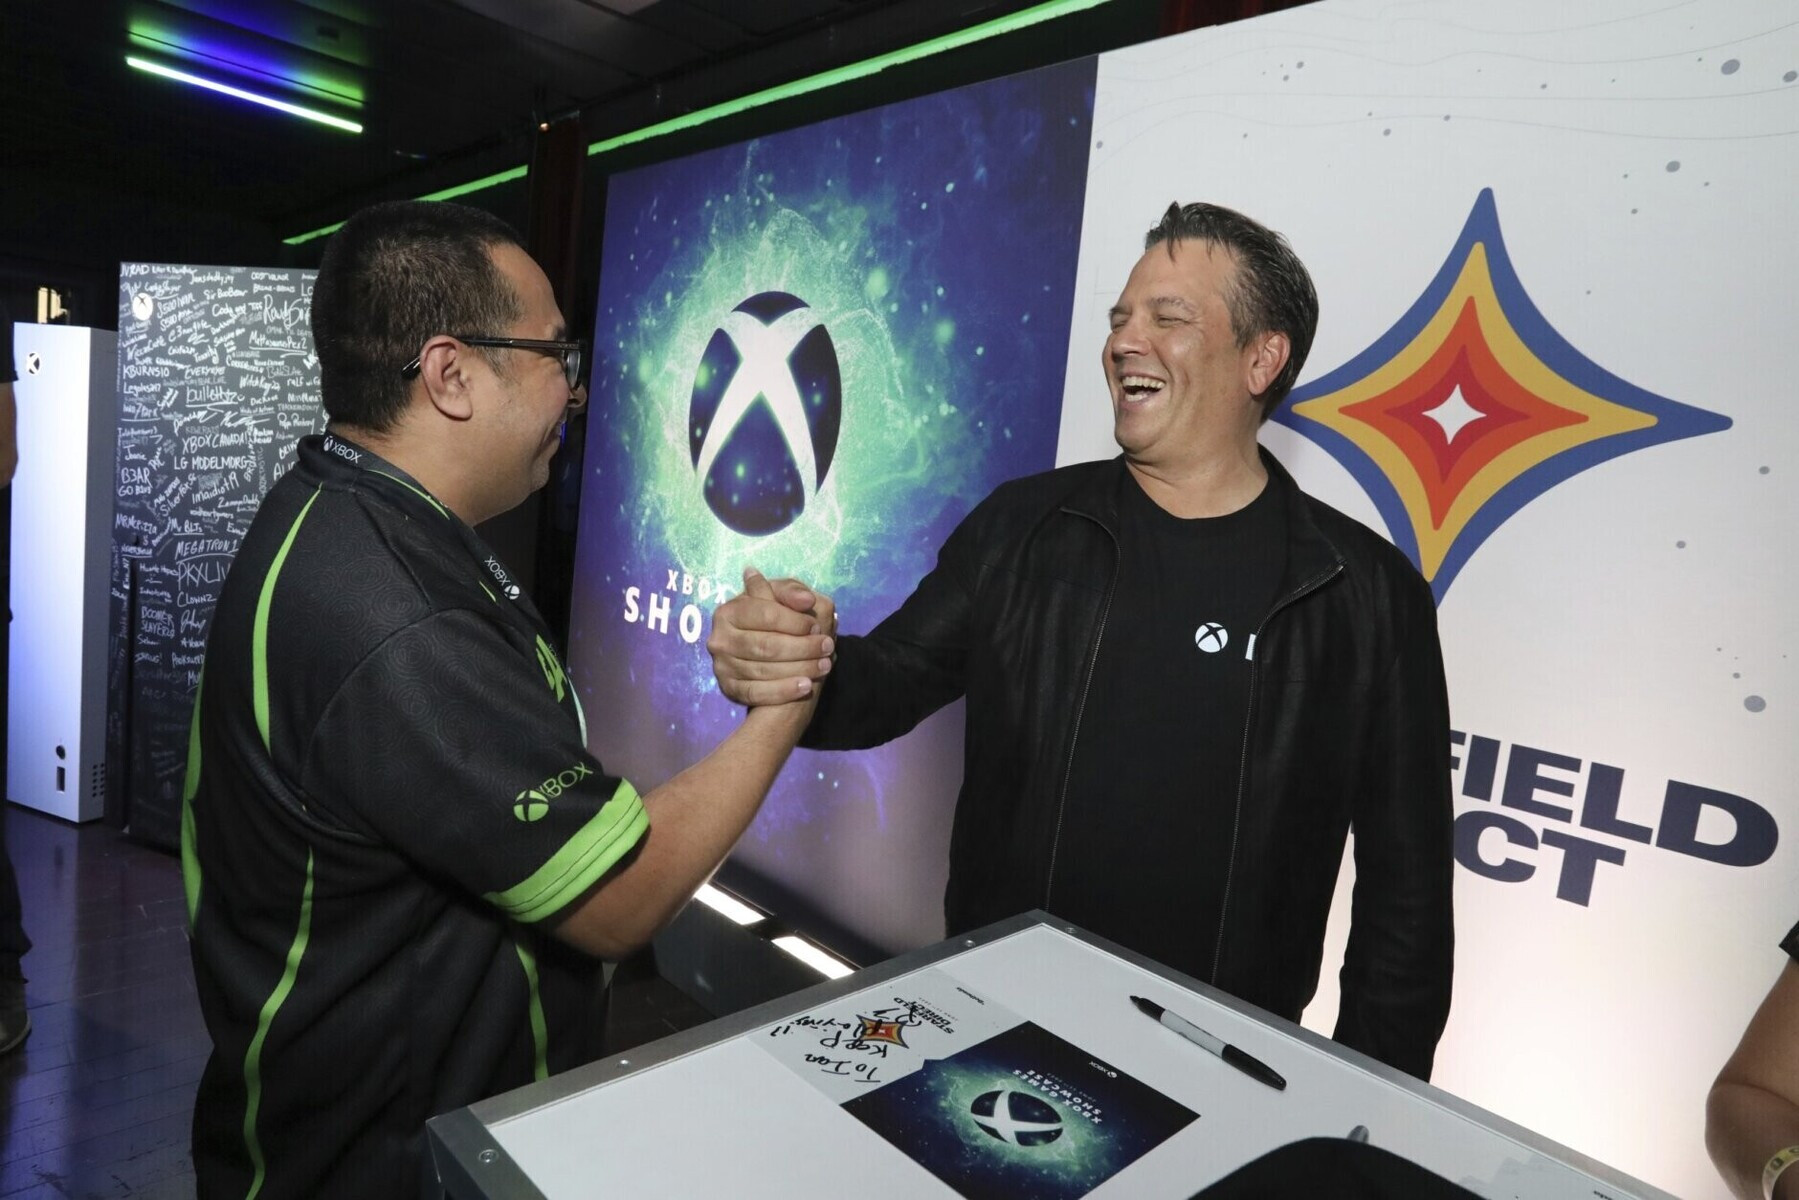 Phil Spencer Net Worth in 2023 How Rich is He Now? - News